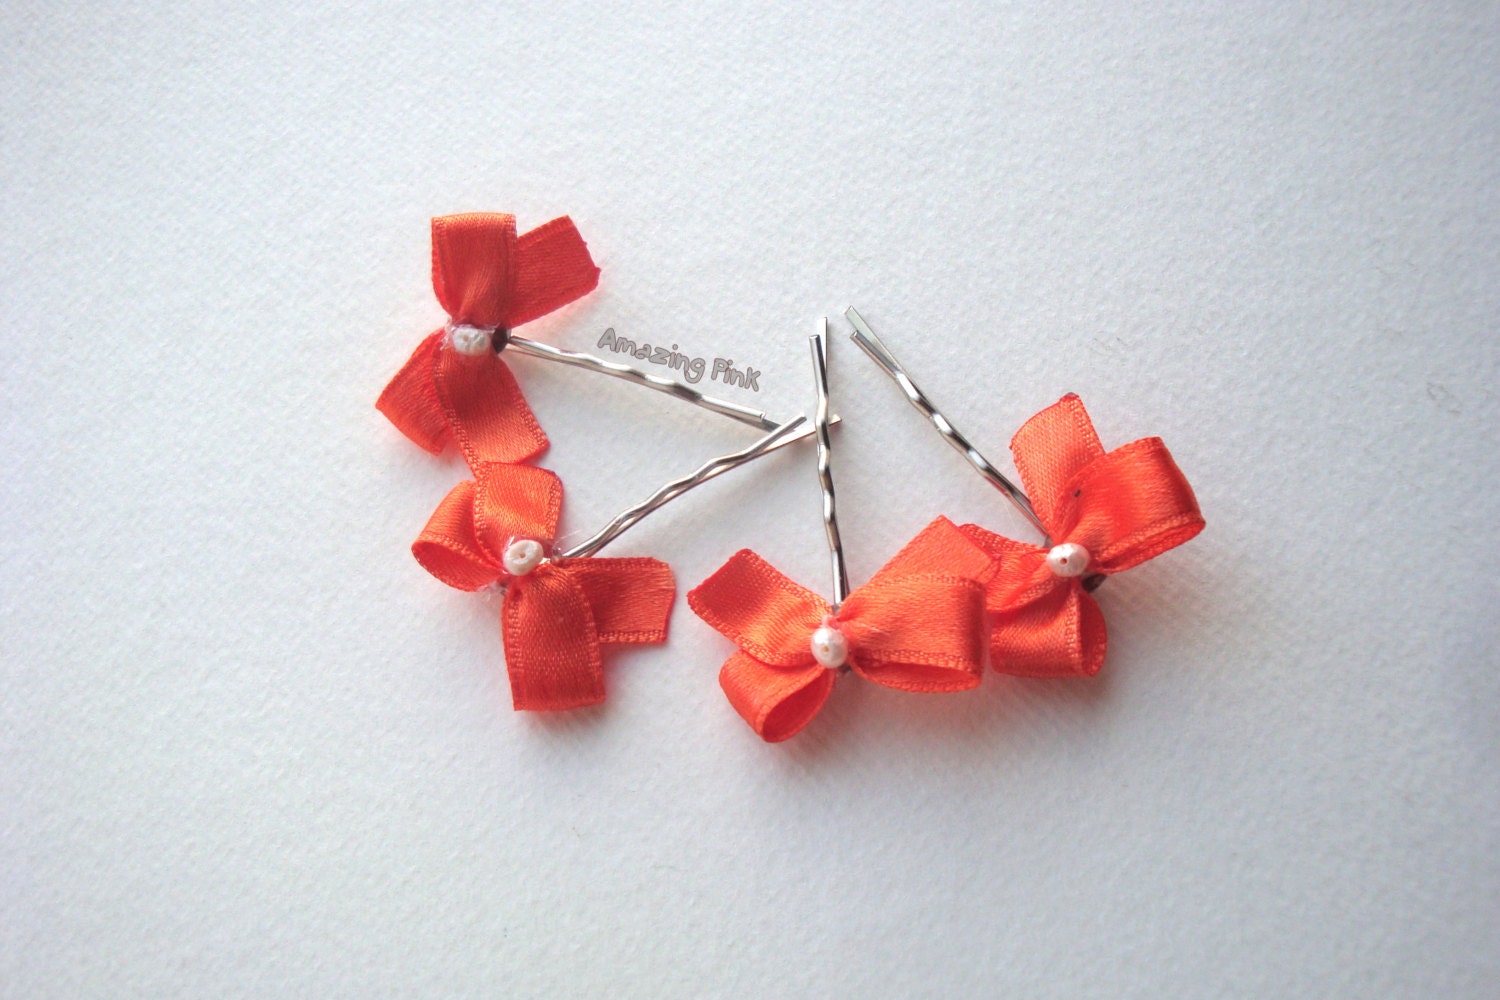 Bow Hair Pins / Bridal Hair Accessory /Orange Bow With Pearls on 2" silver bobby pins / Set of 4 - AmazingPink